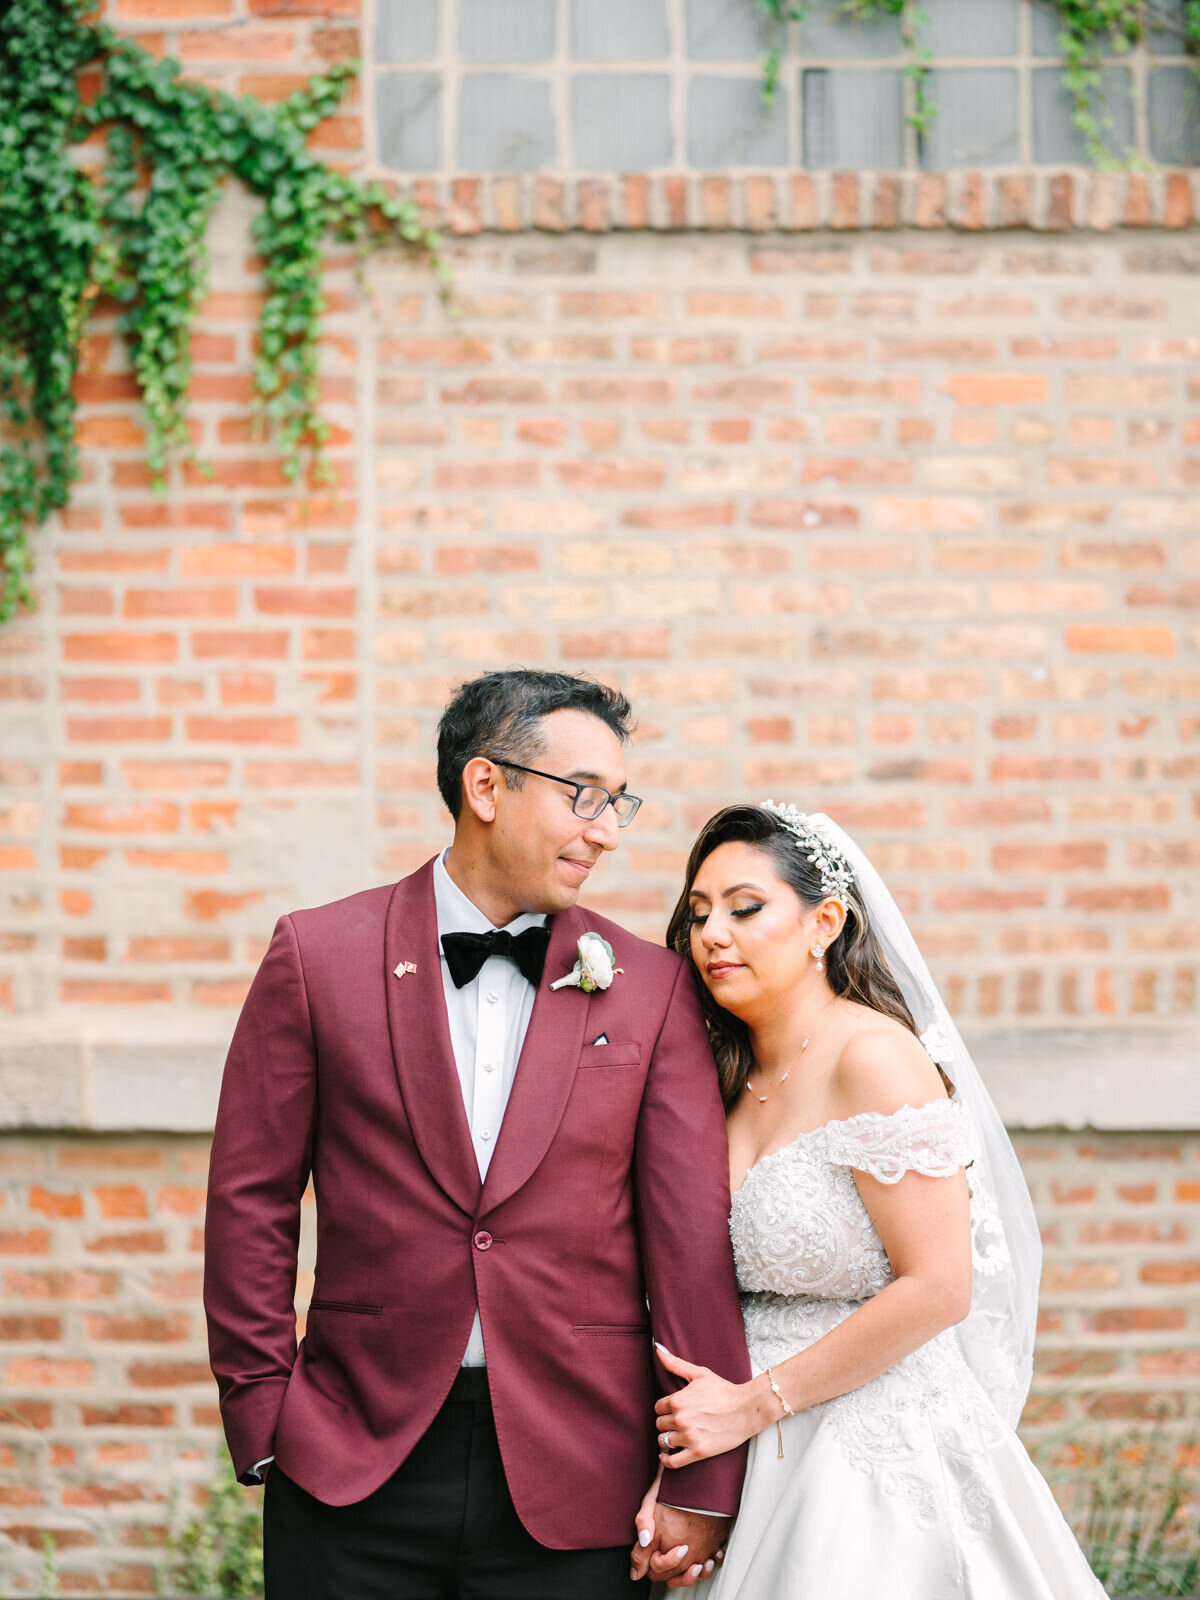 the-fairlie-industrial-chicago-wedding-kassieanaphotography.com